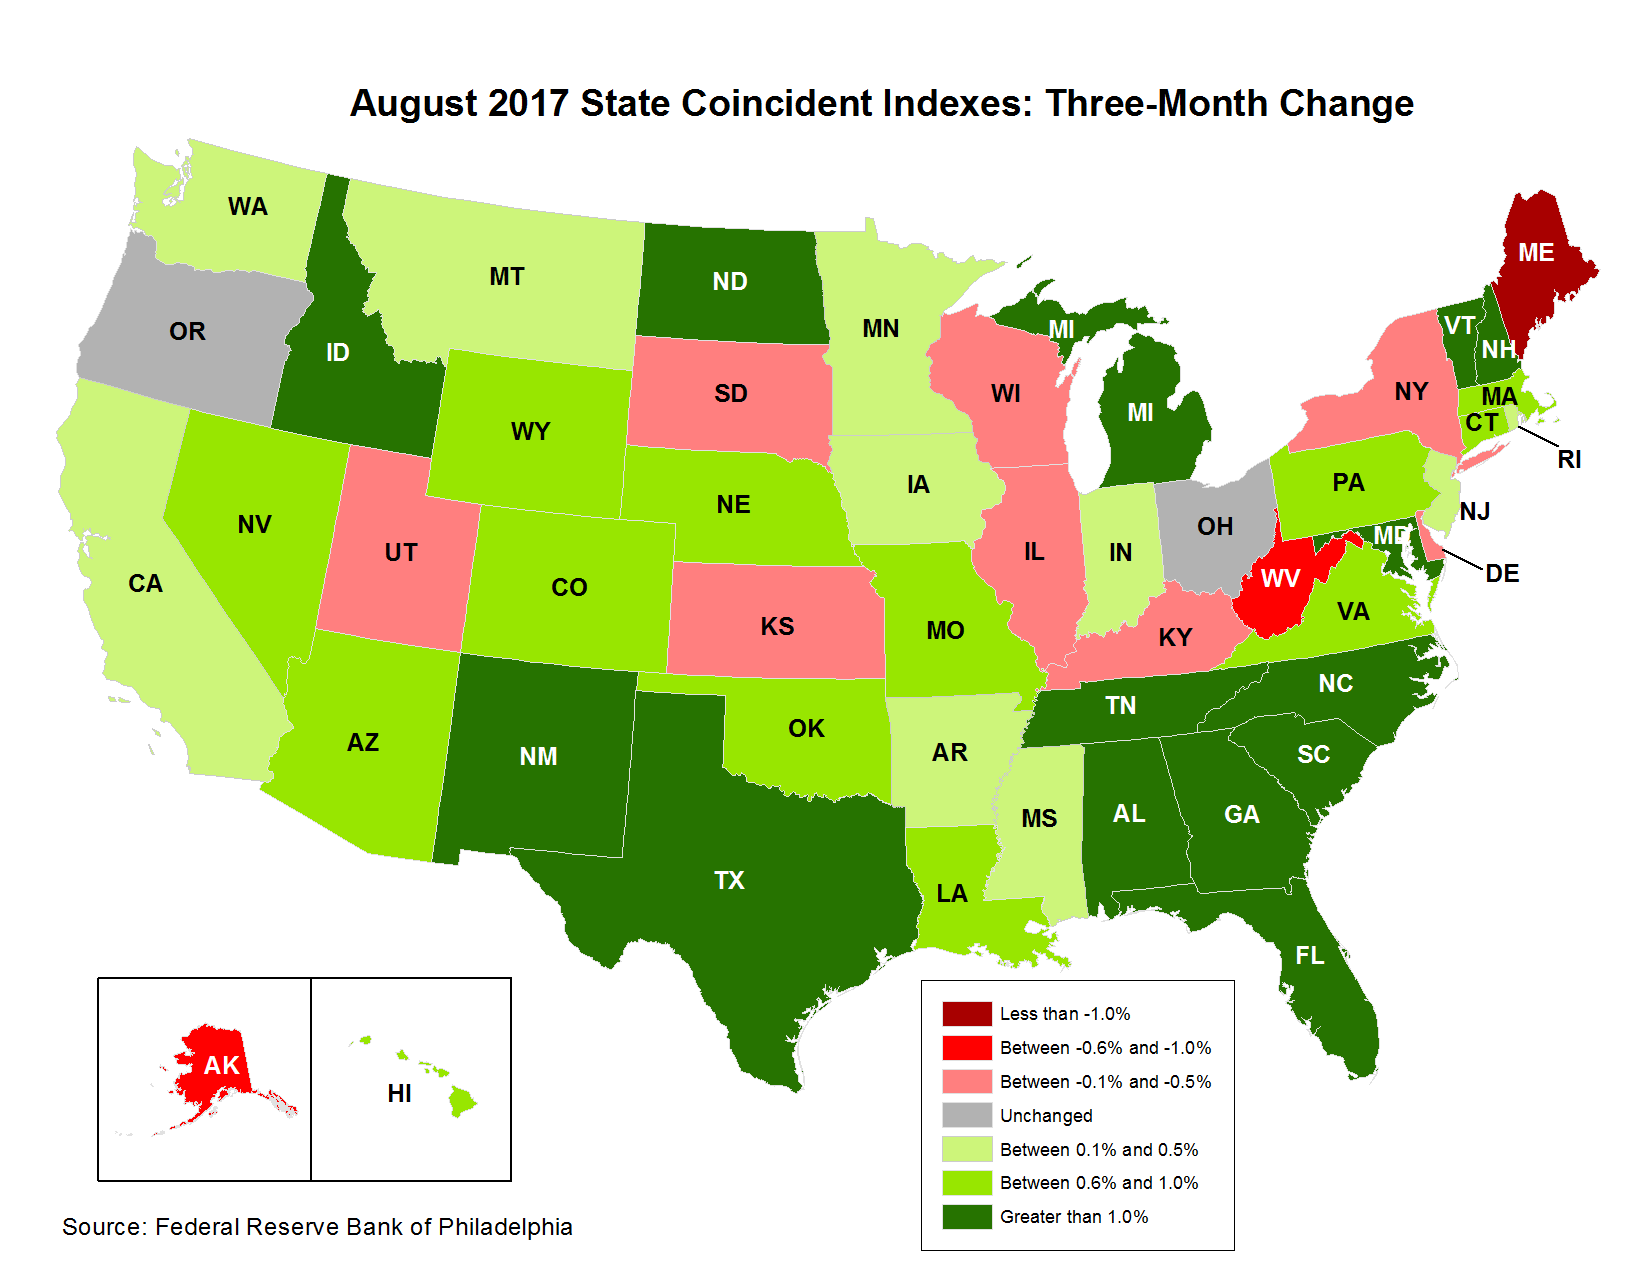 Map of the U.S. showing the State Coincident Indexes Three-Month Change in August 2017